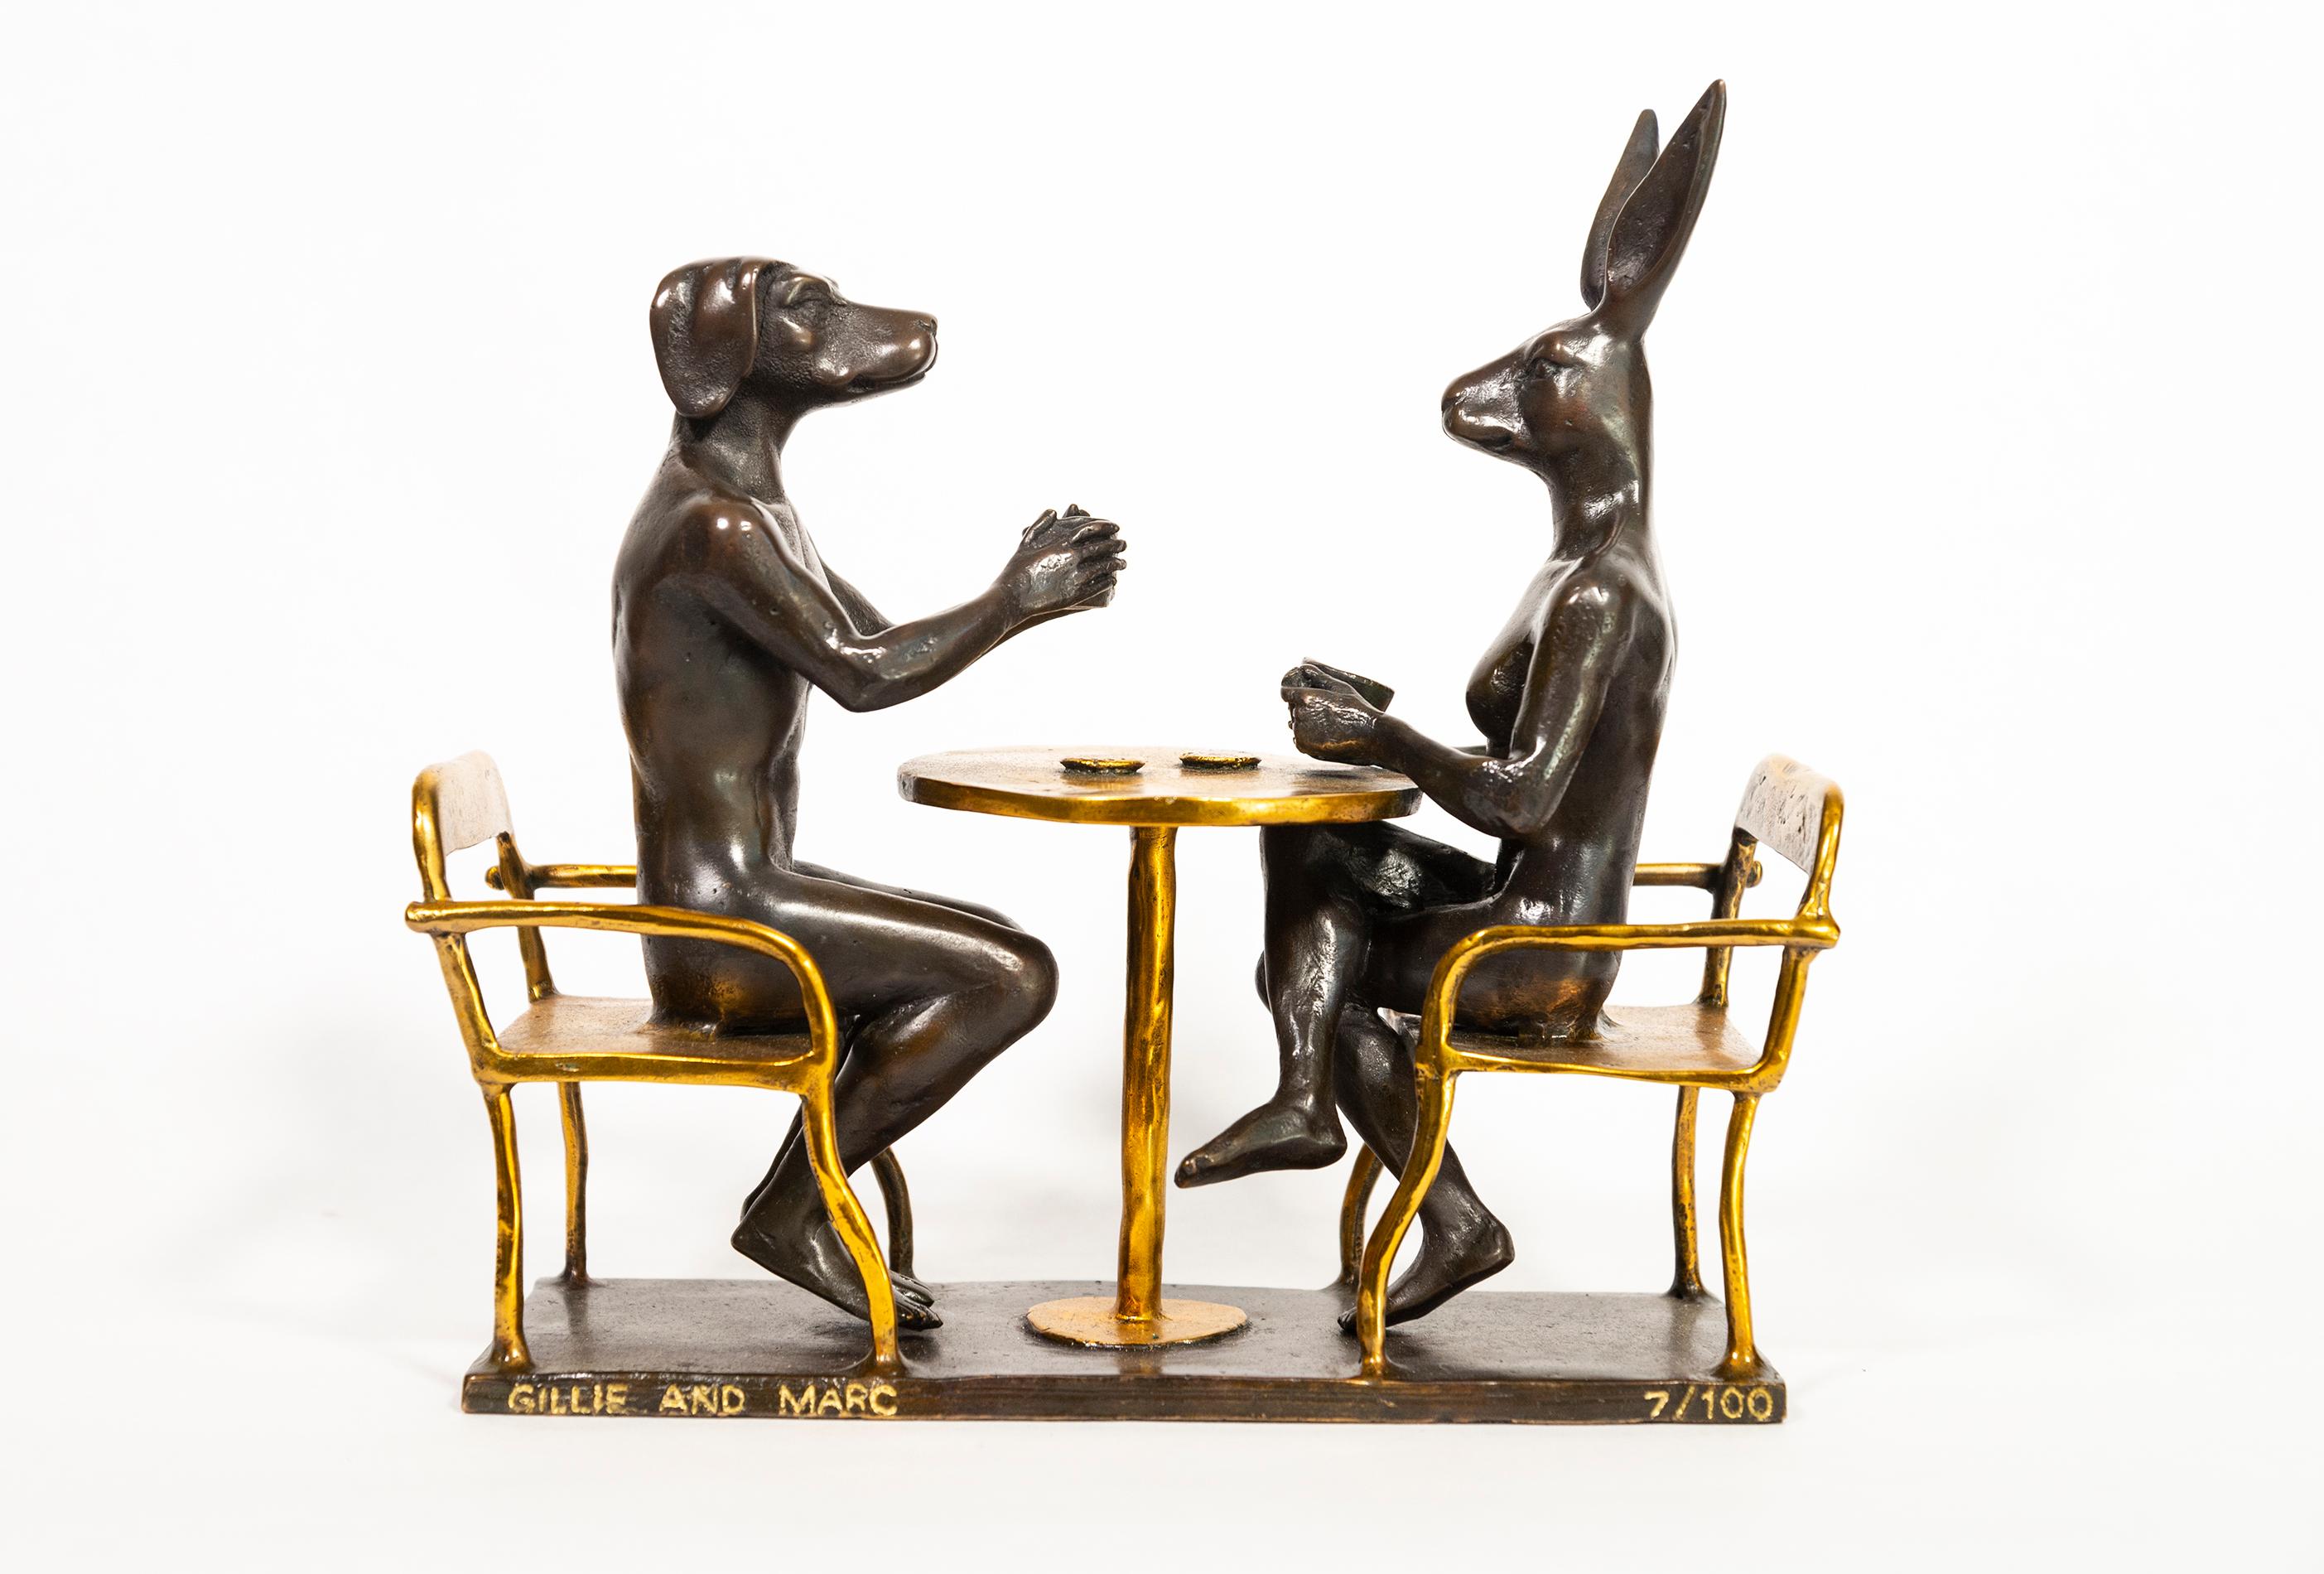 Gillie and Marc Schattner Figurative Sculpture - They drank coffee all day and all night 7/100 - figurative, bronze sculpture